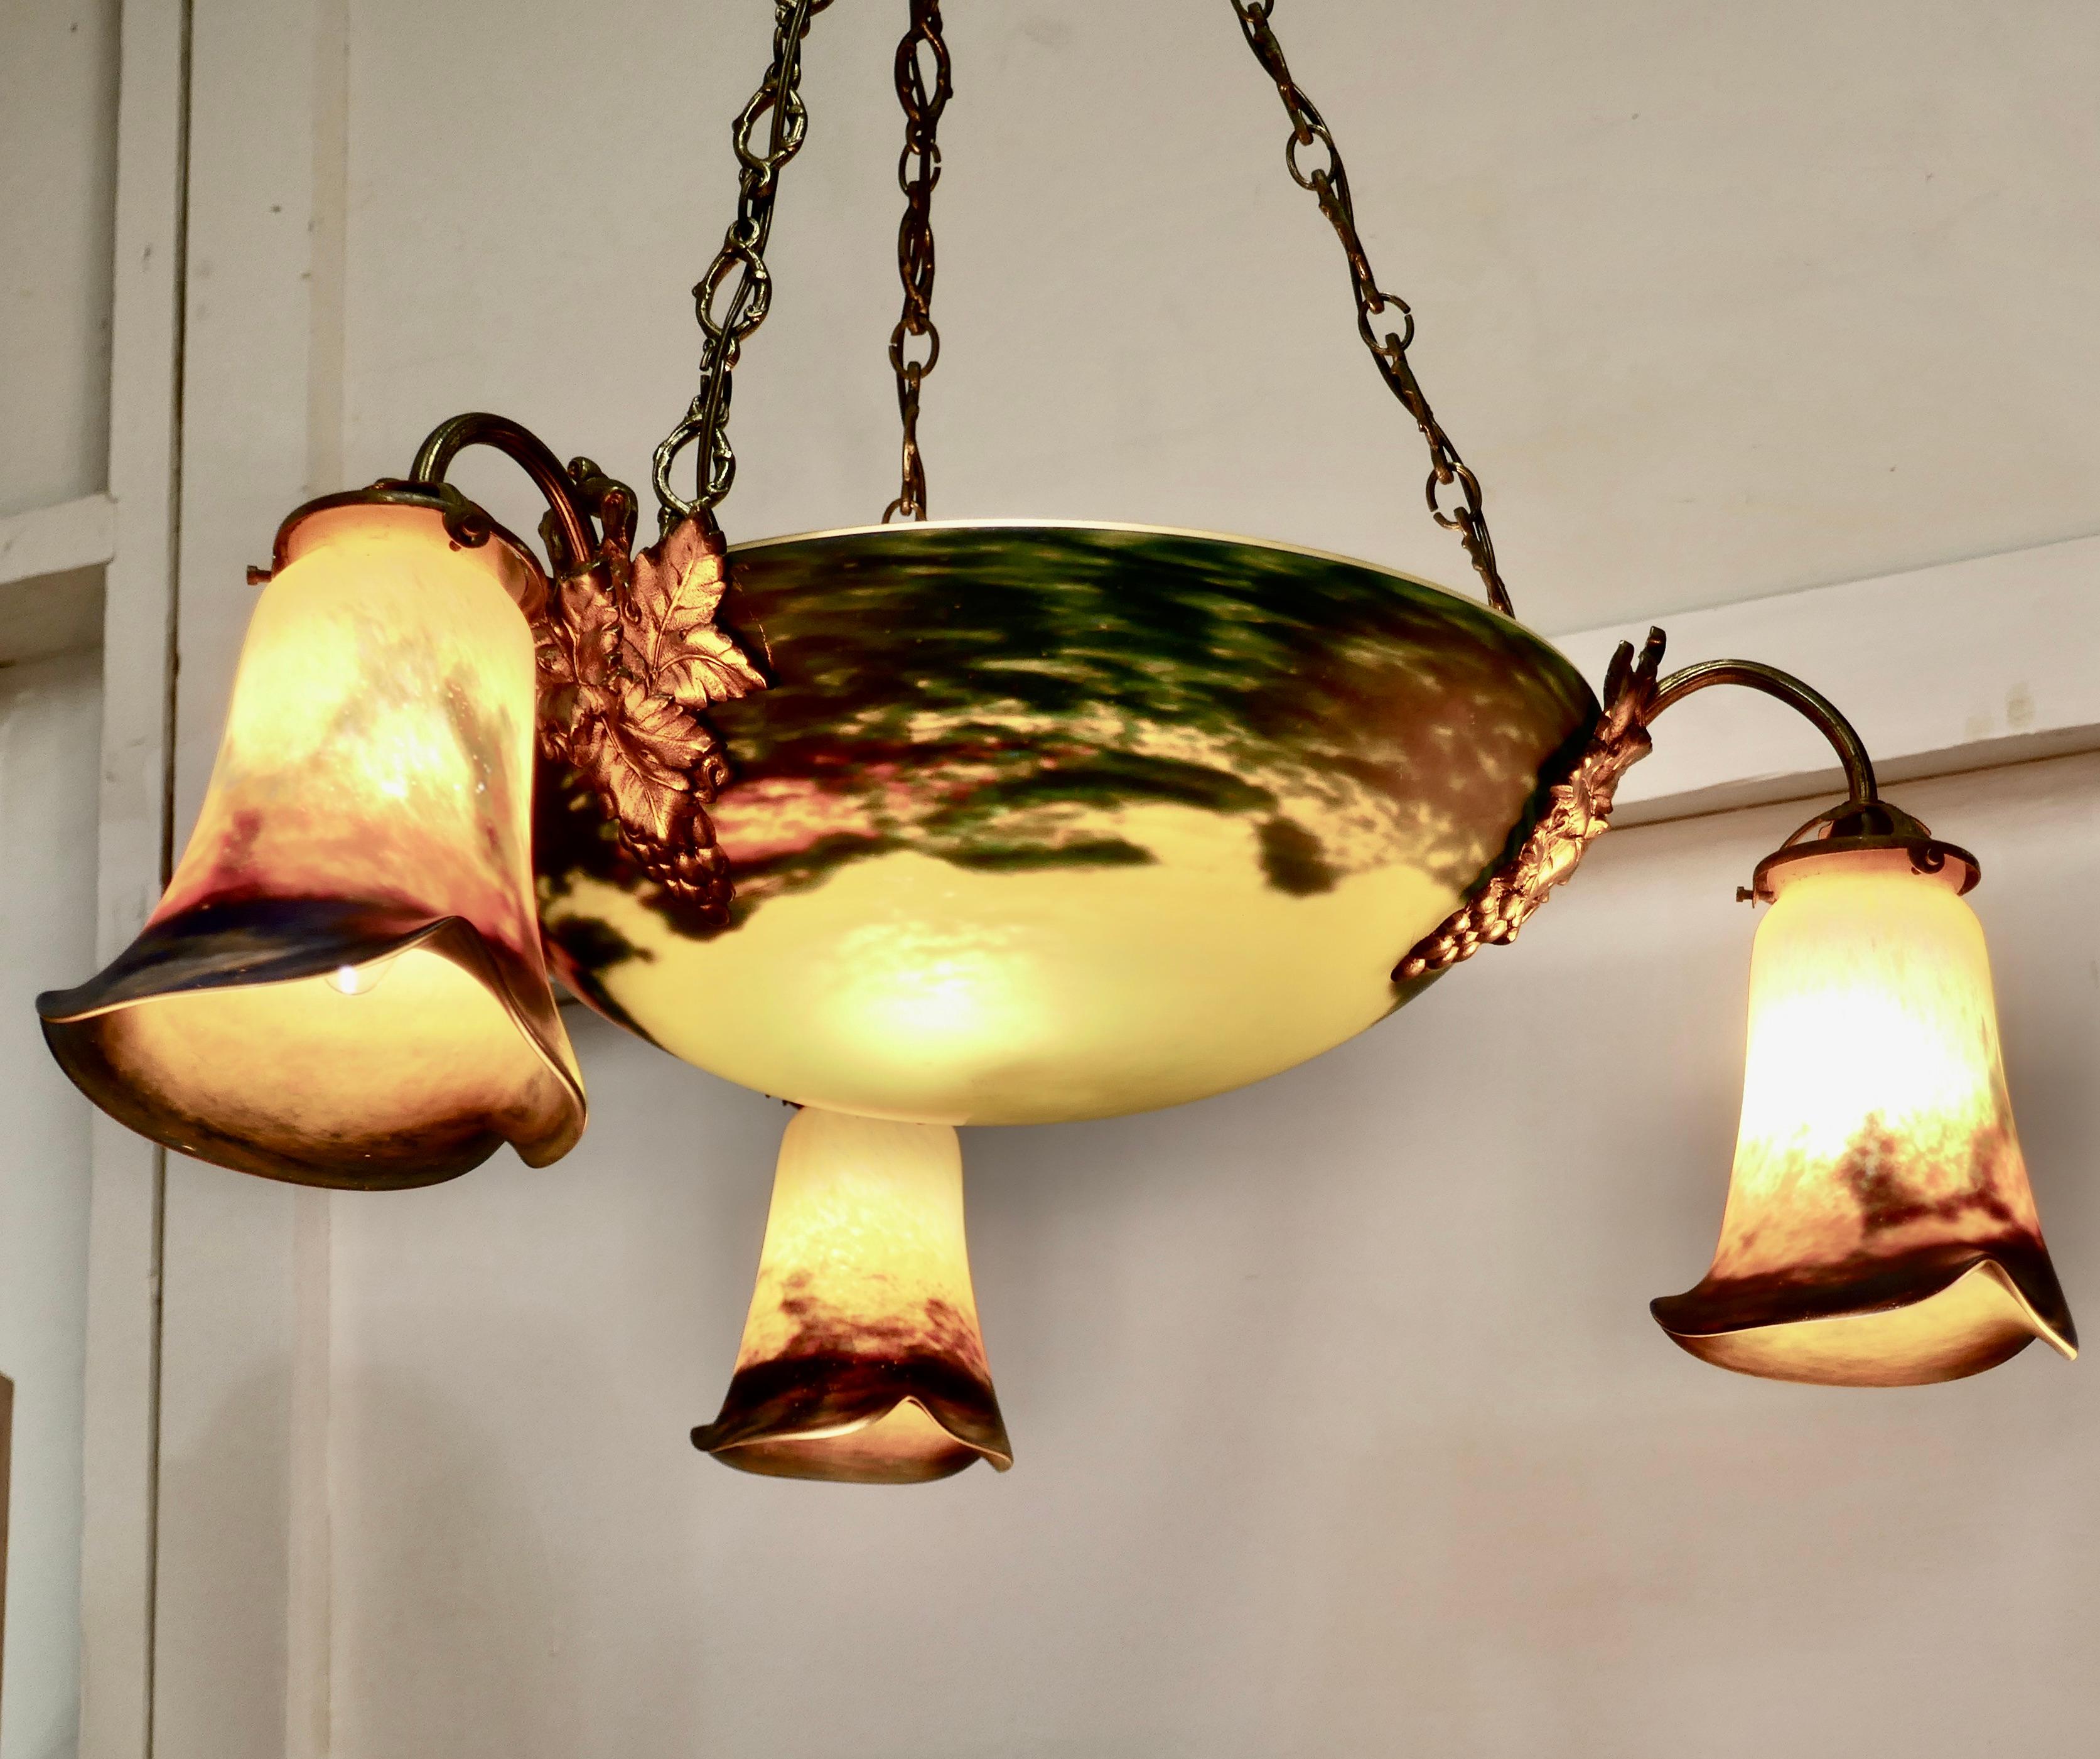 Superb Art Deco painted glass 3-branch centre light

A very unusual and brightly colored piece, the lamp has a large main bowl in the center and 3 branches with decorative ormolu mounts
The glass is decorated in bright color mainly Yellow, it